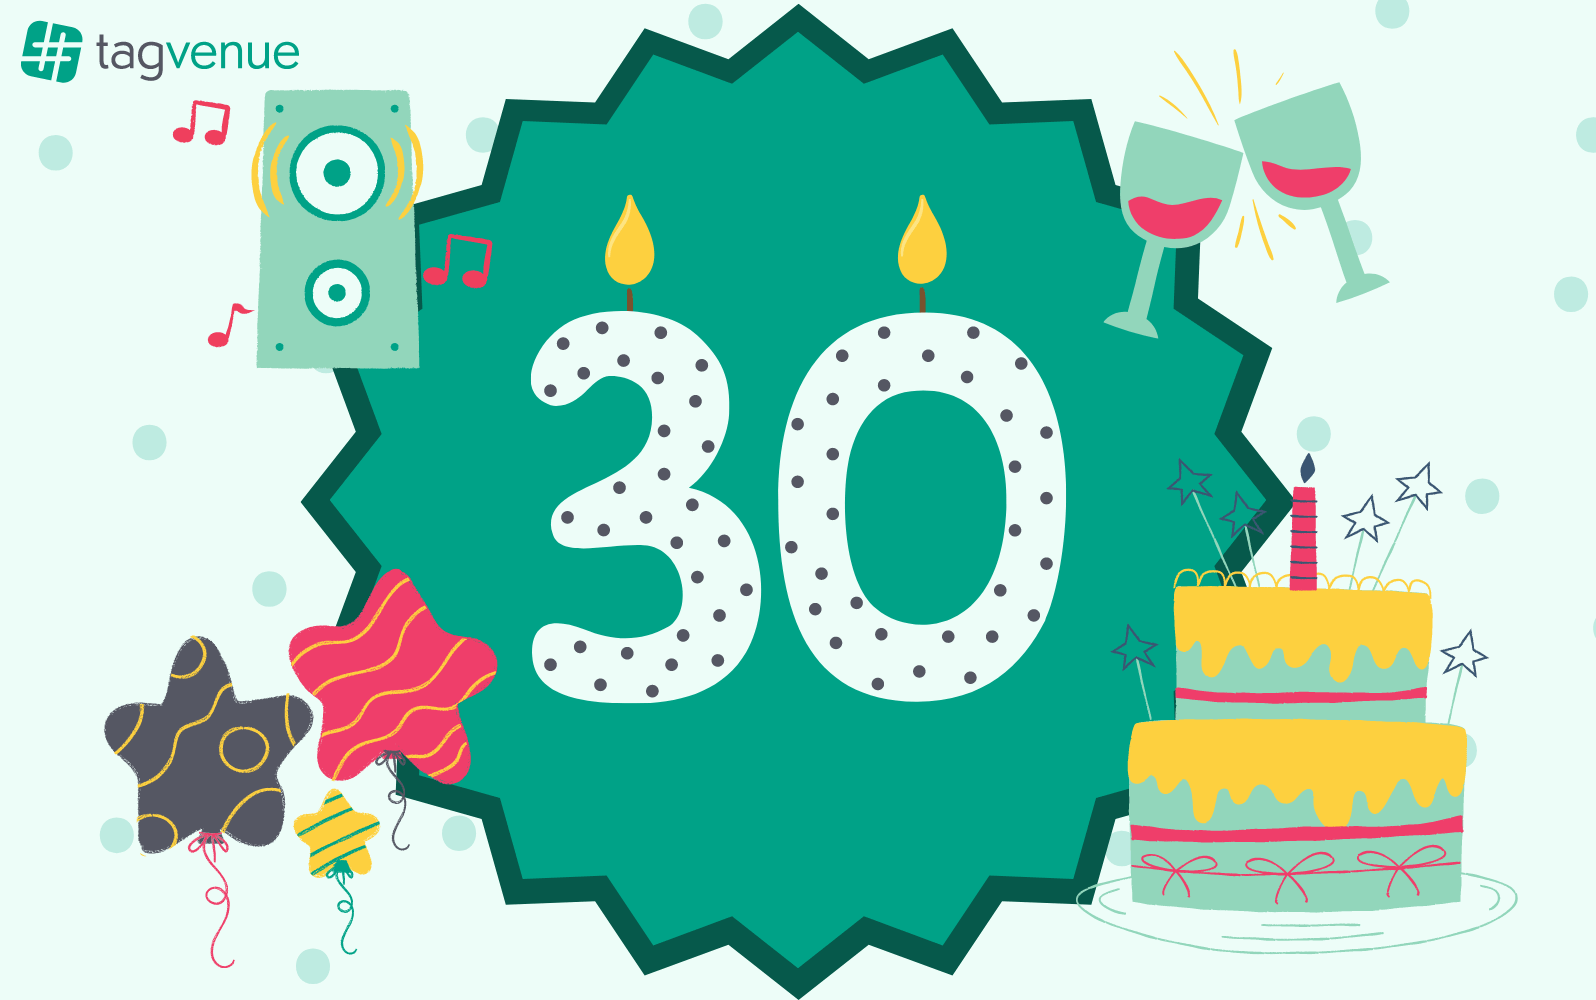 30+ Exciting 30th Birthday Ideas to Mark the Milestone